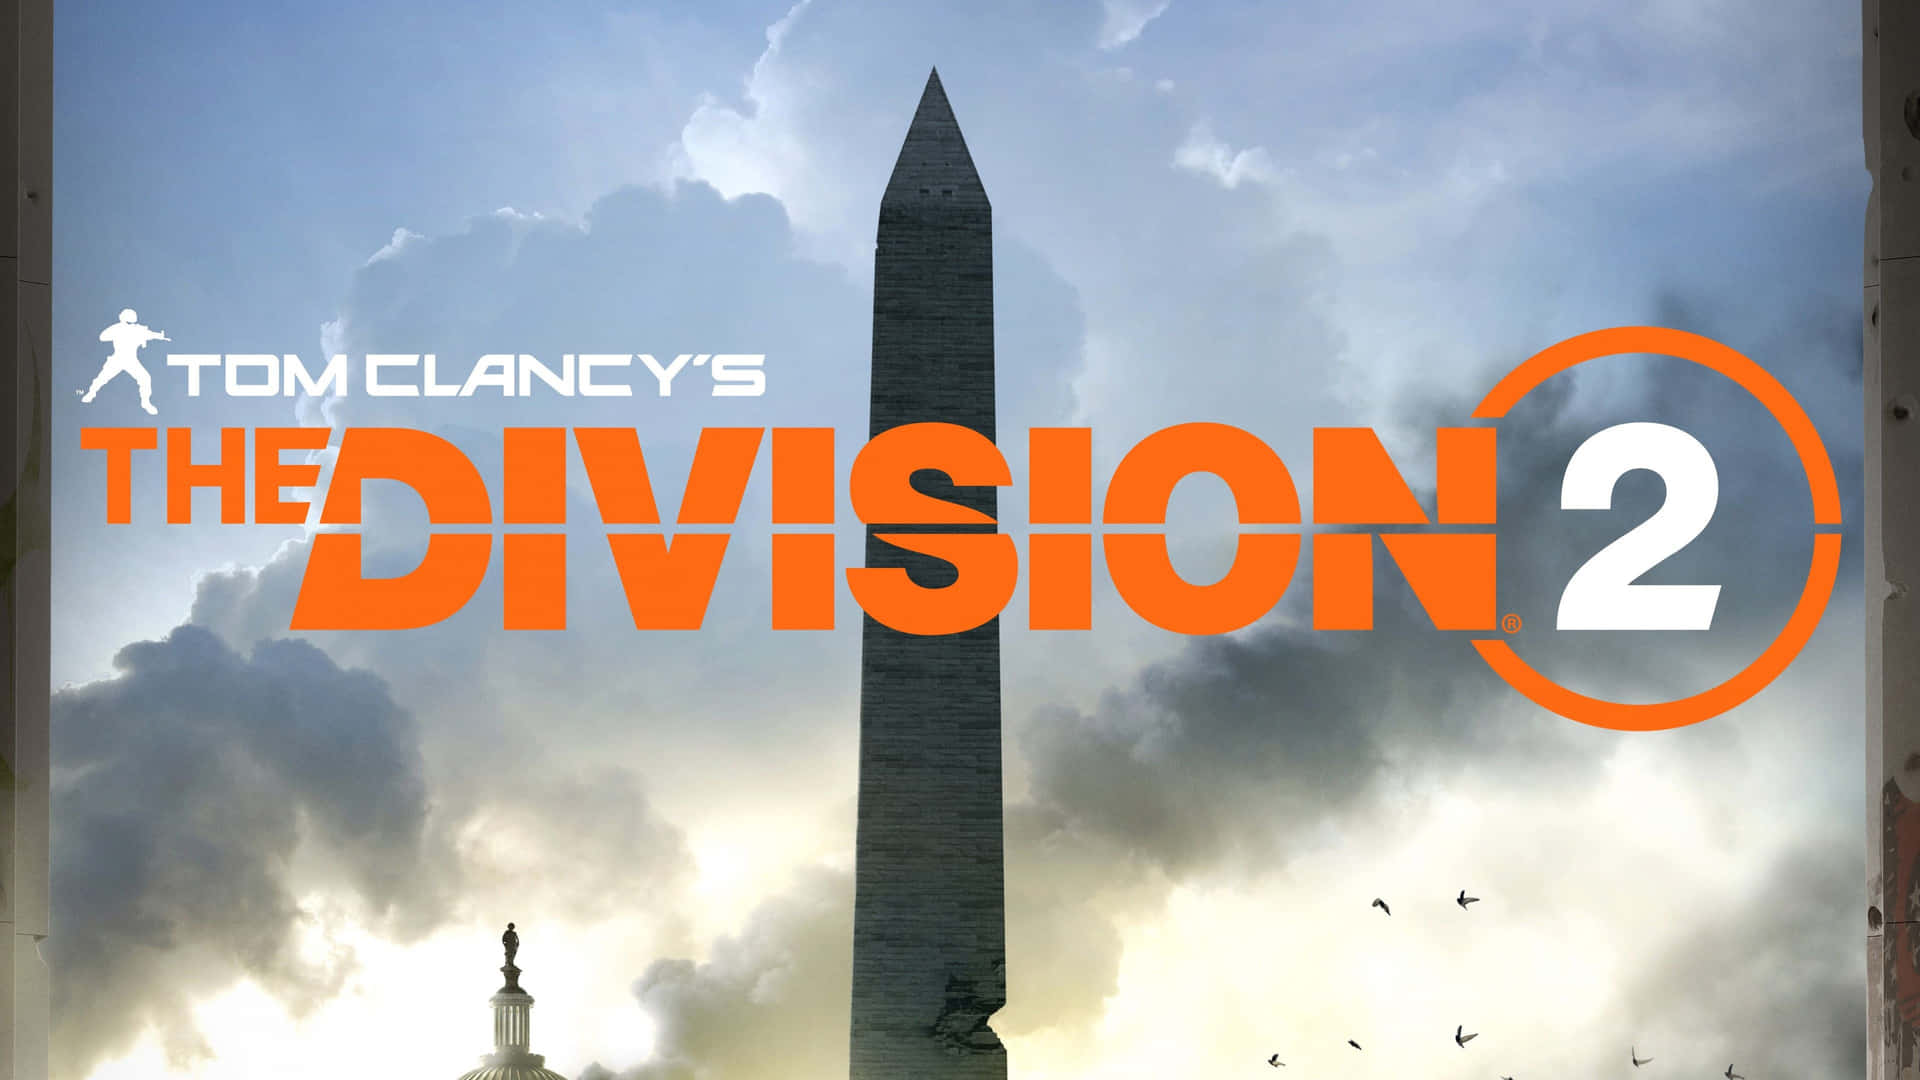 Explore Washington as a part of Agent Highfield in "The Division 2" Wallpaper